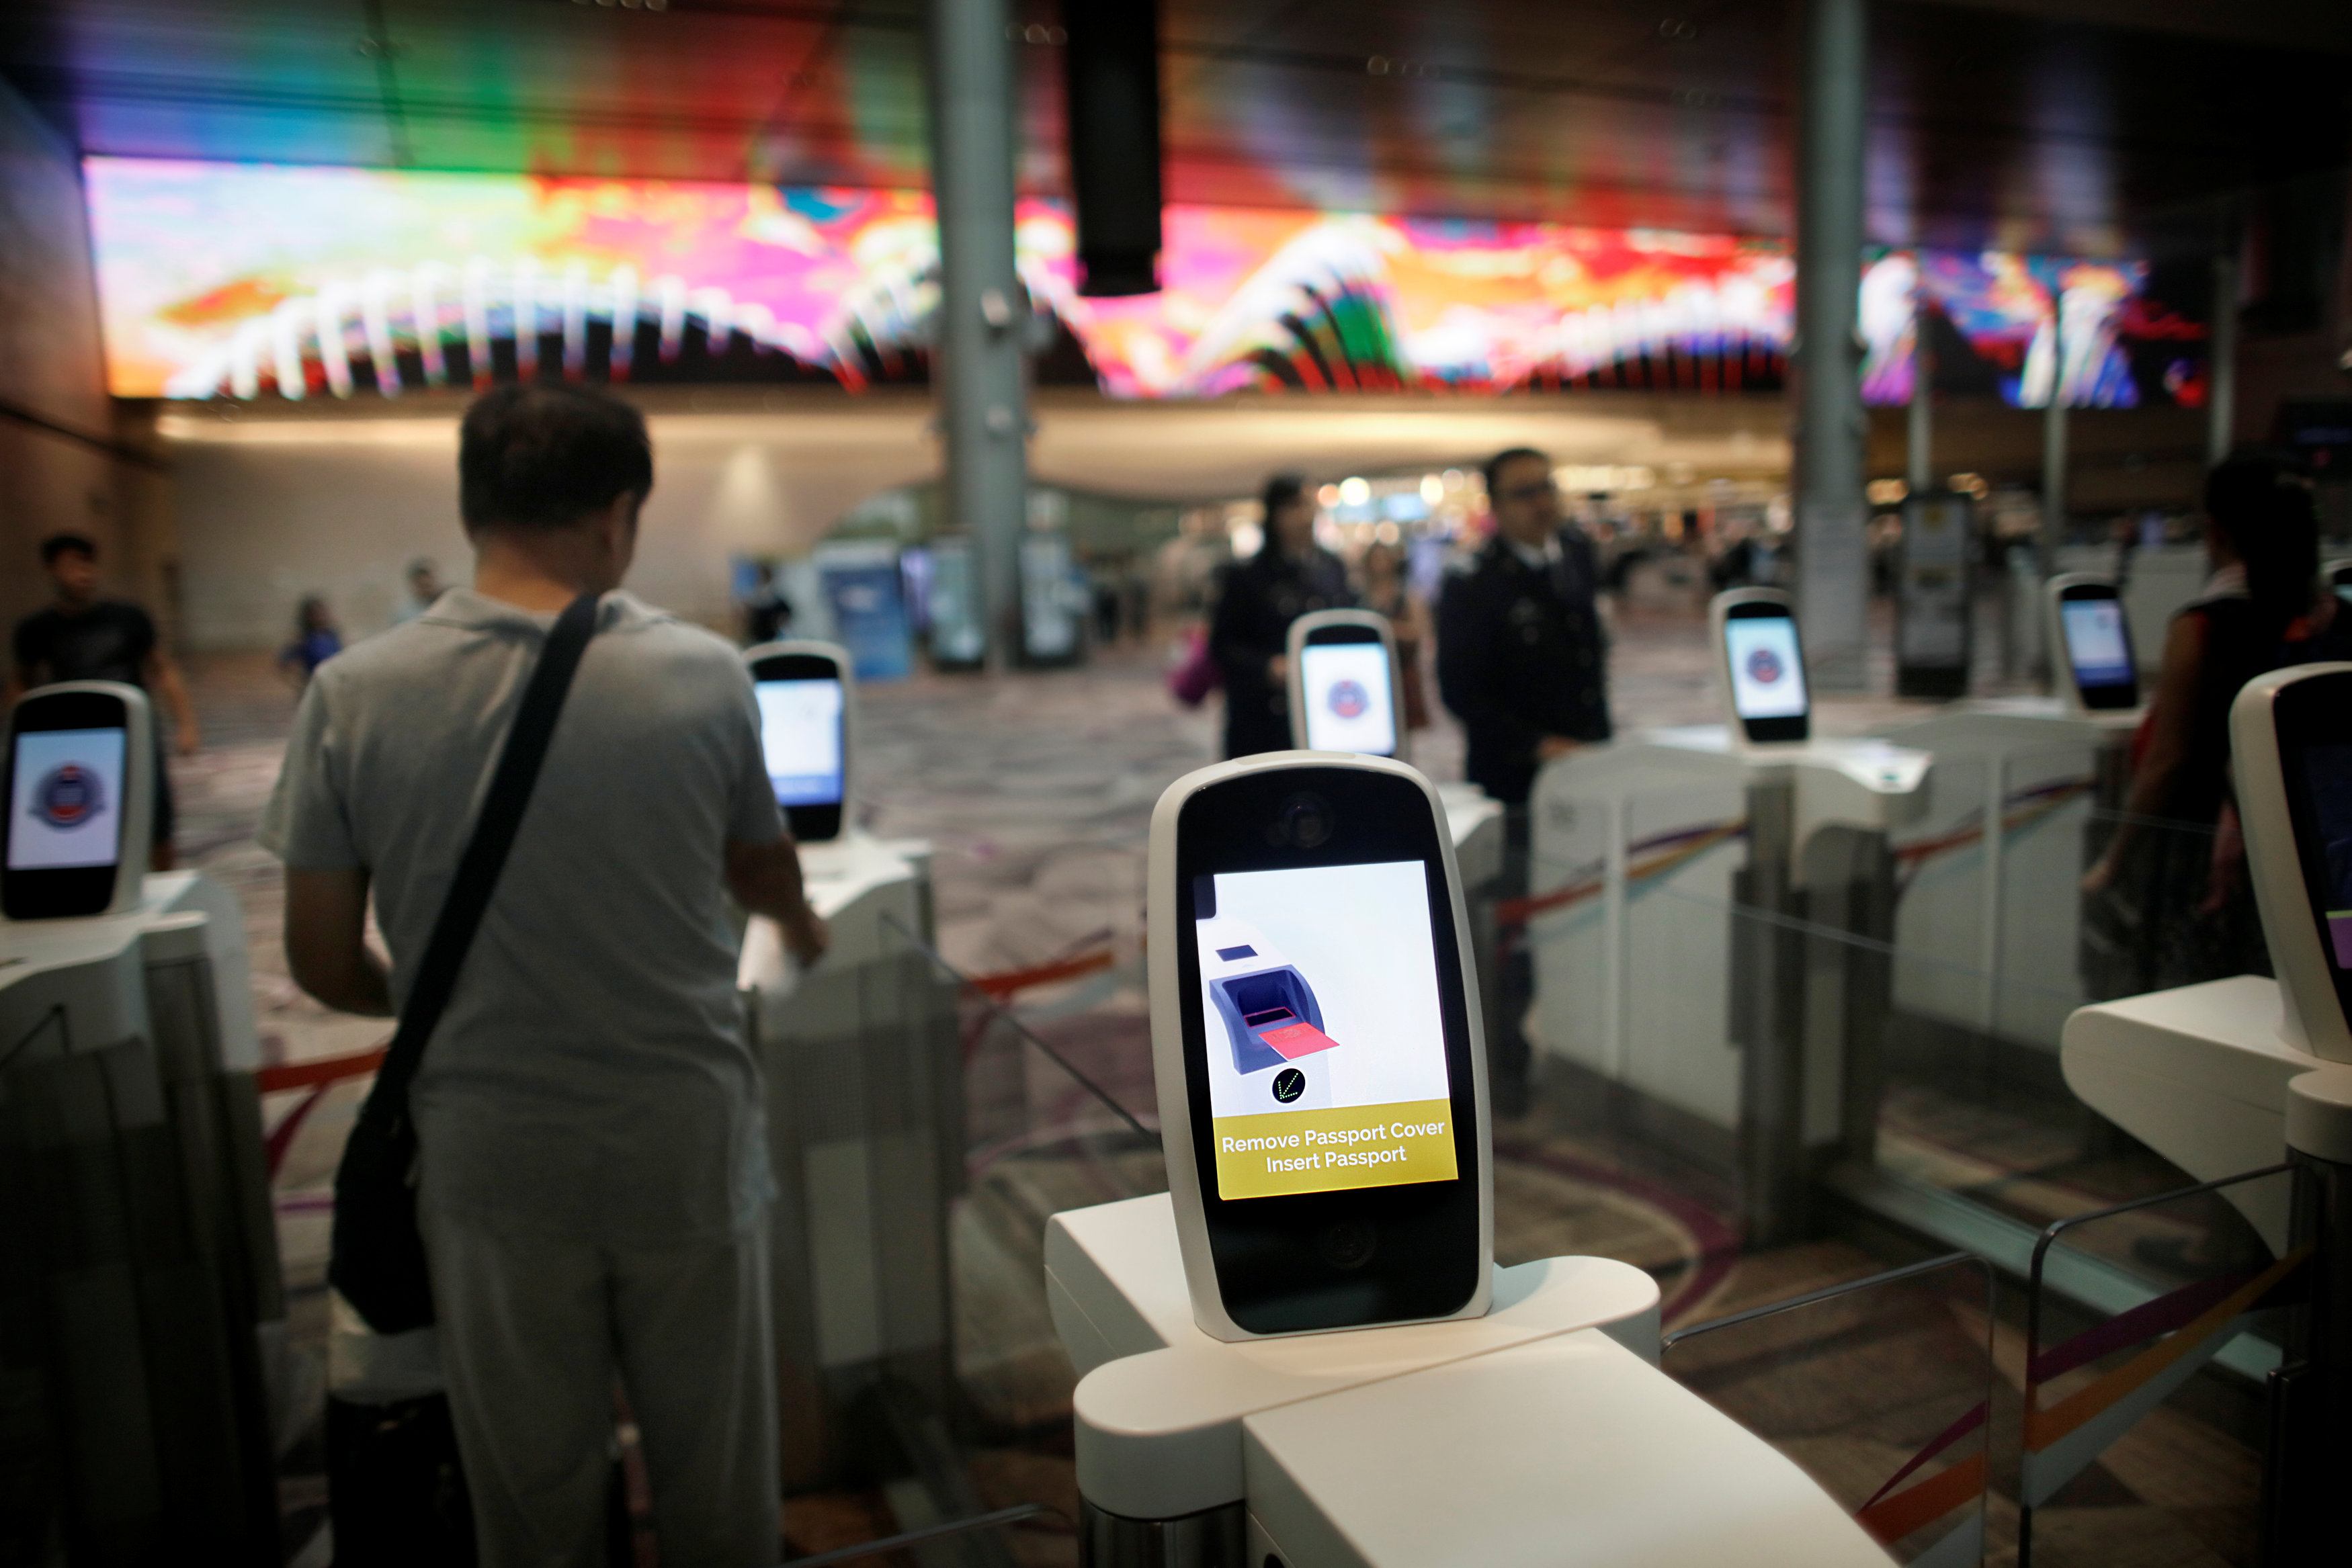 Singapore airport may use facial recognition systems to find late passengers